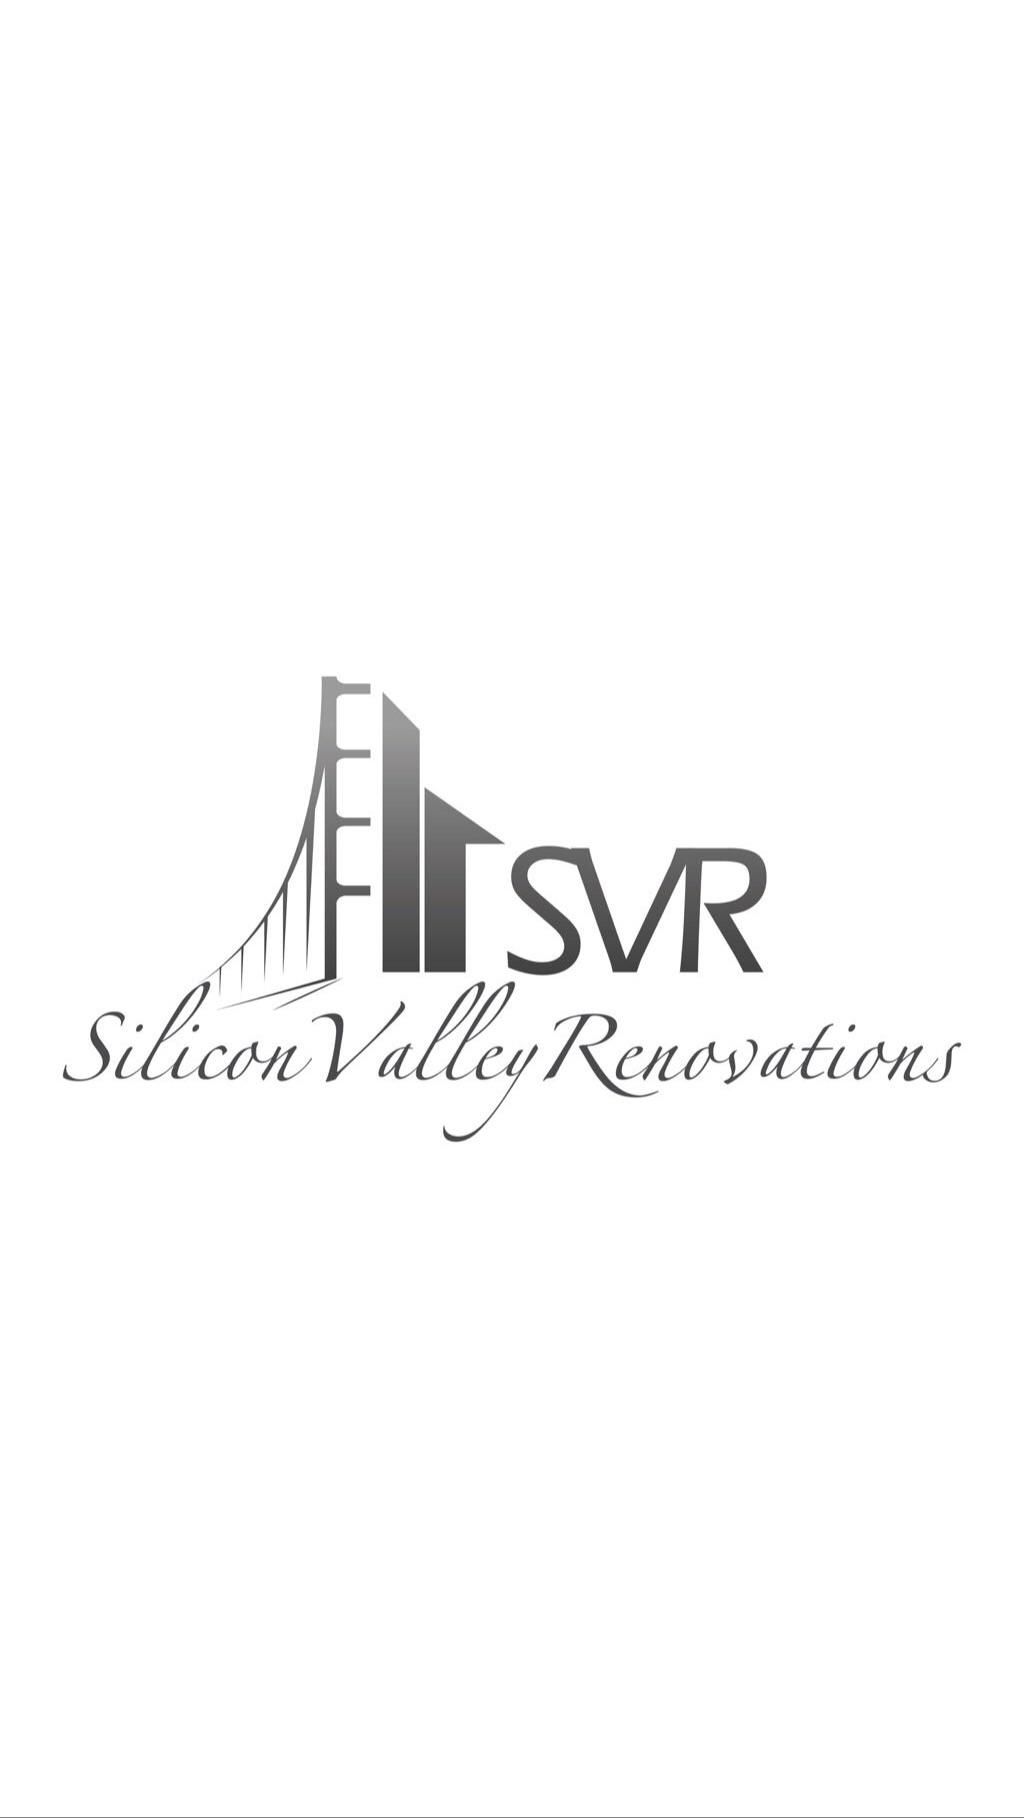 Silicon Valley Renovations